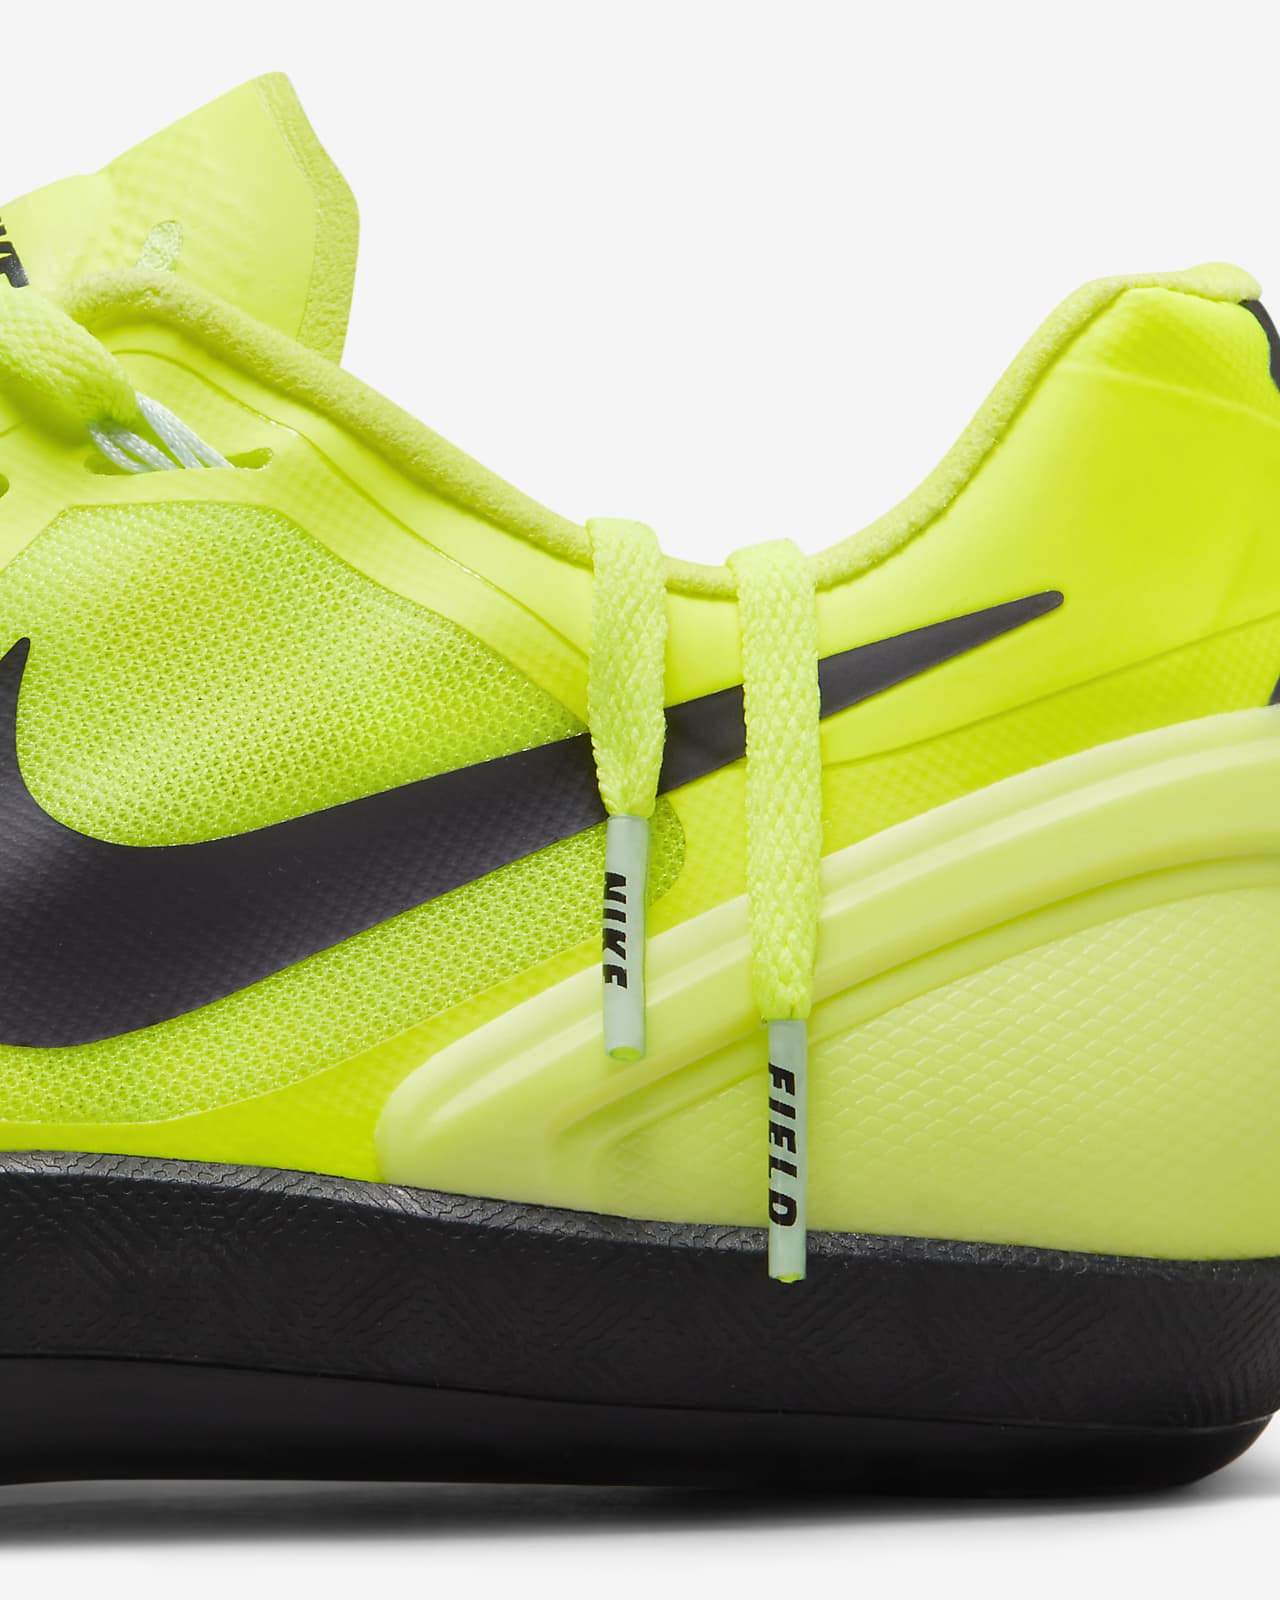 Nike Zoom Rotational 6 Athletics Throwing Shoes. IE